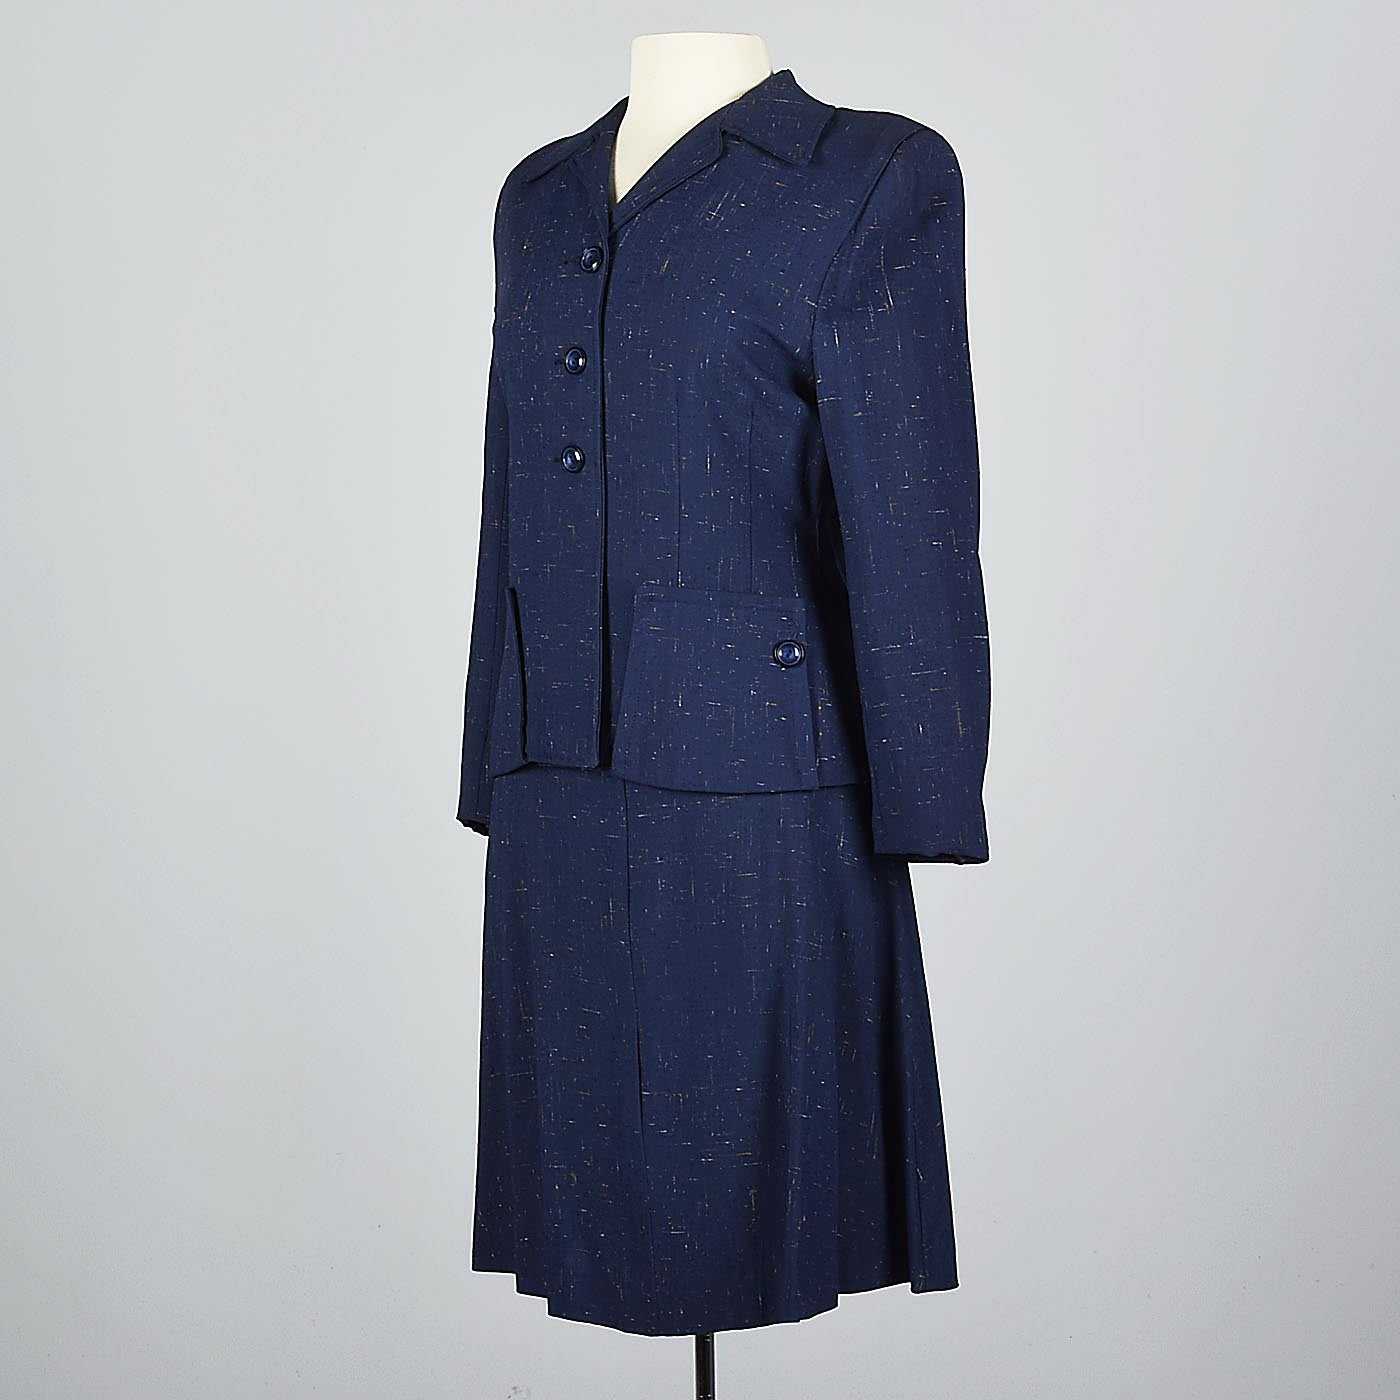 1940s Skirt Suit in Flecked Navy Fabric